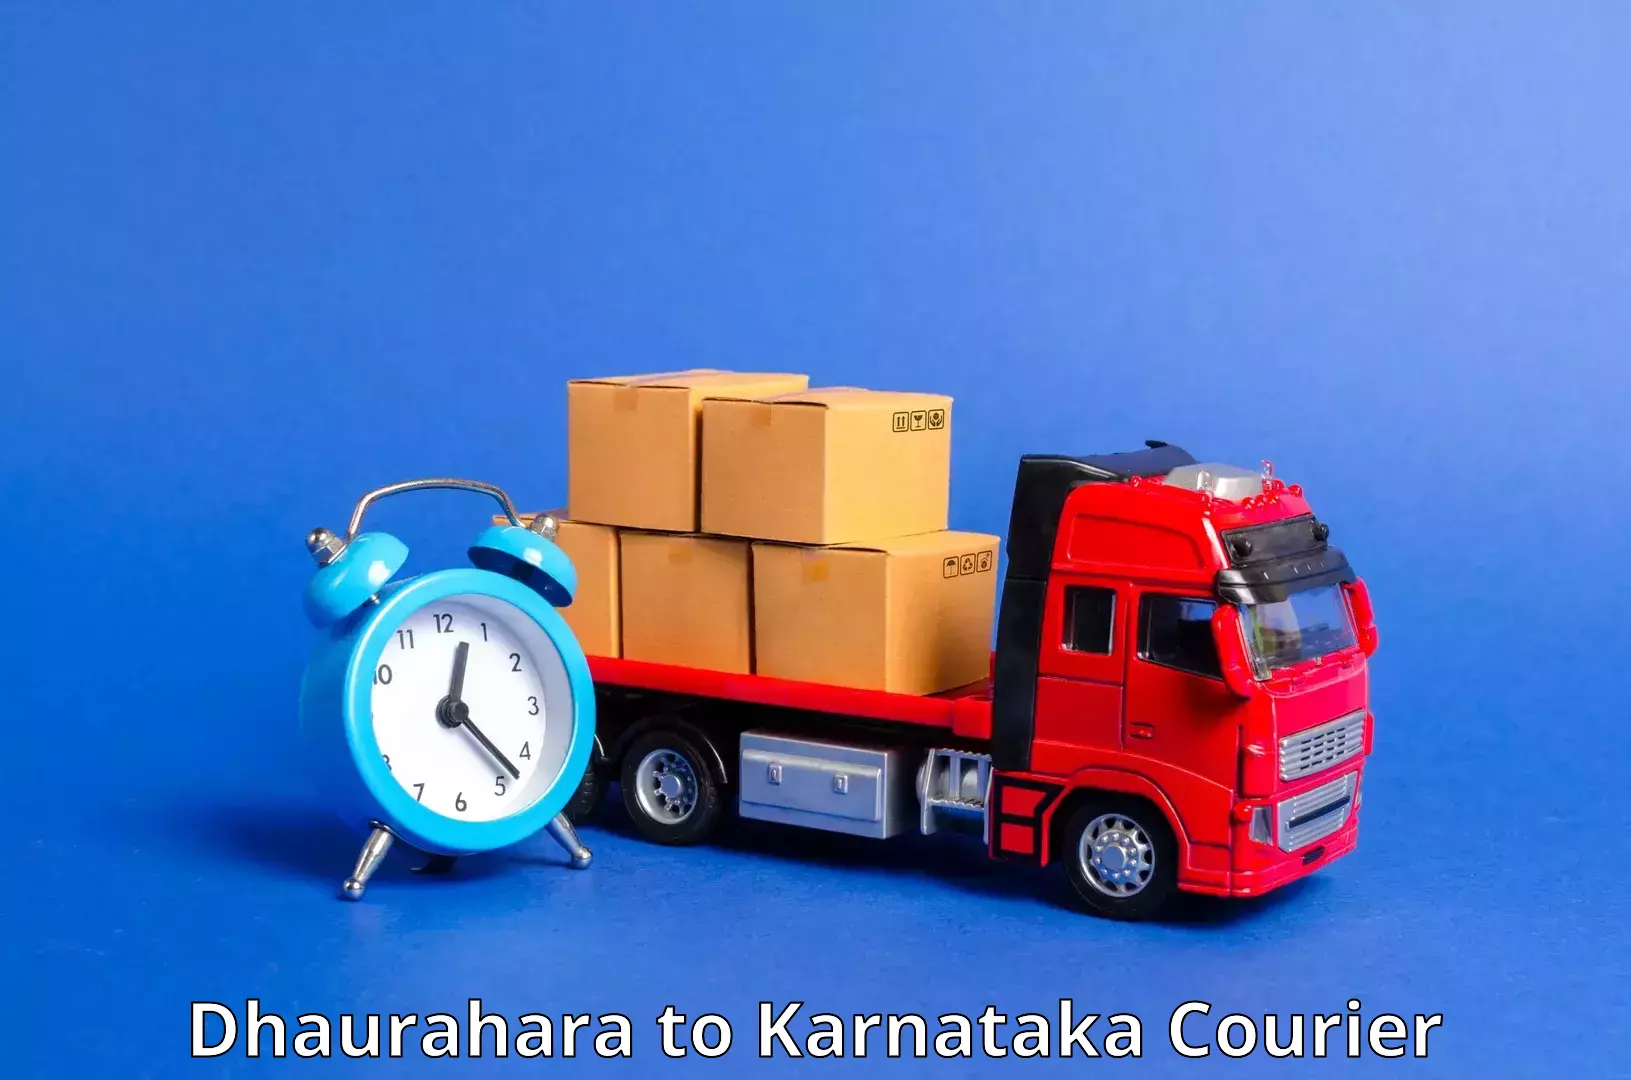 State-of-the-art courier technology Dhaurahara to Shanivarasanthe